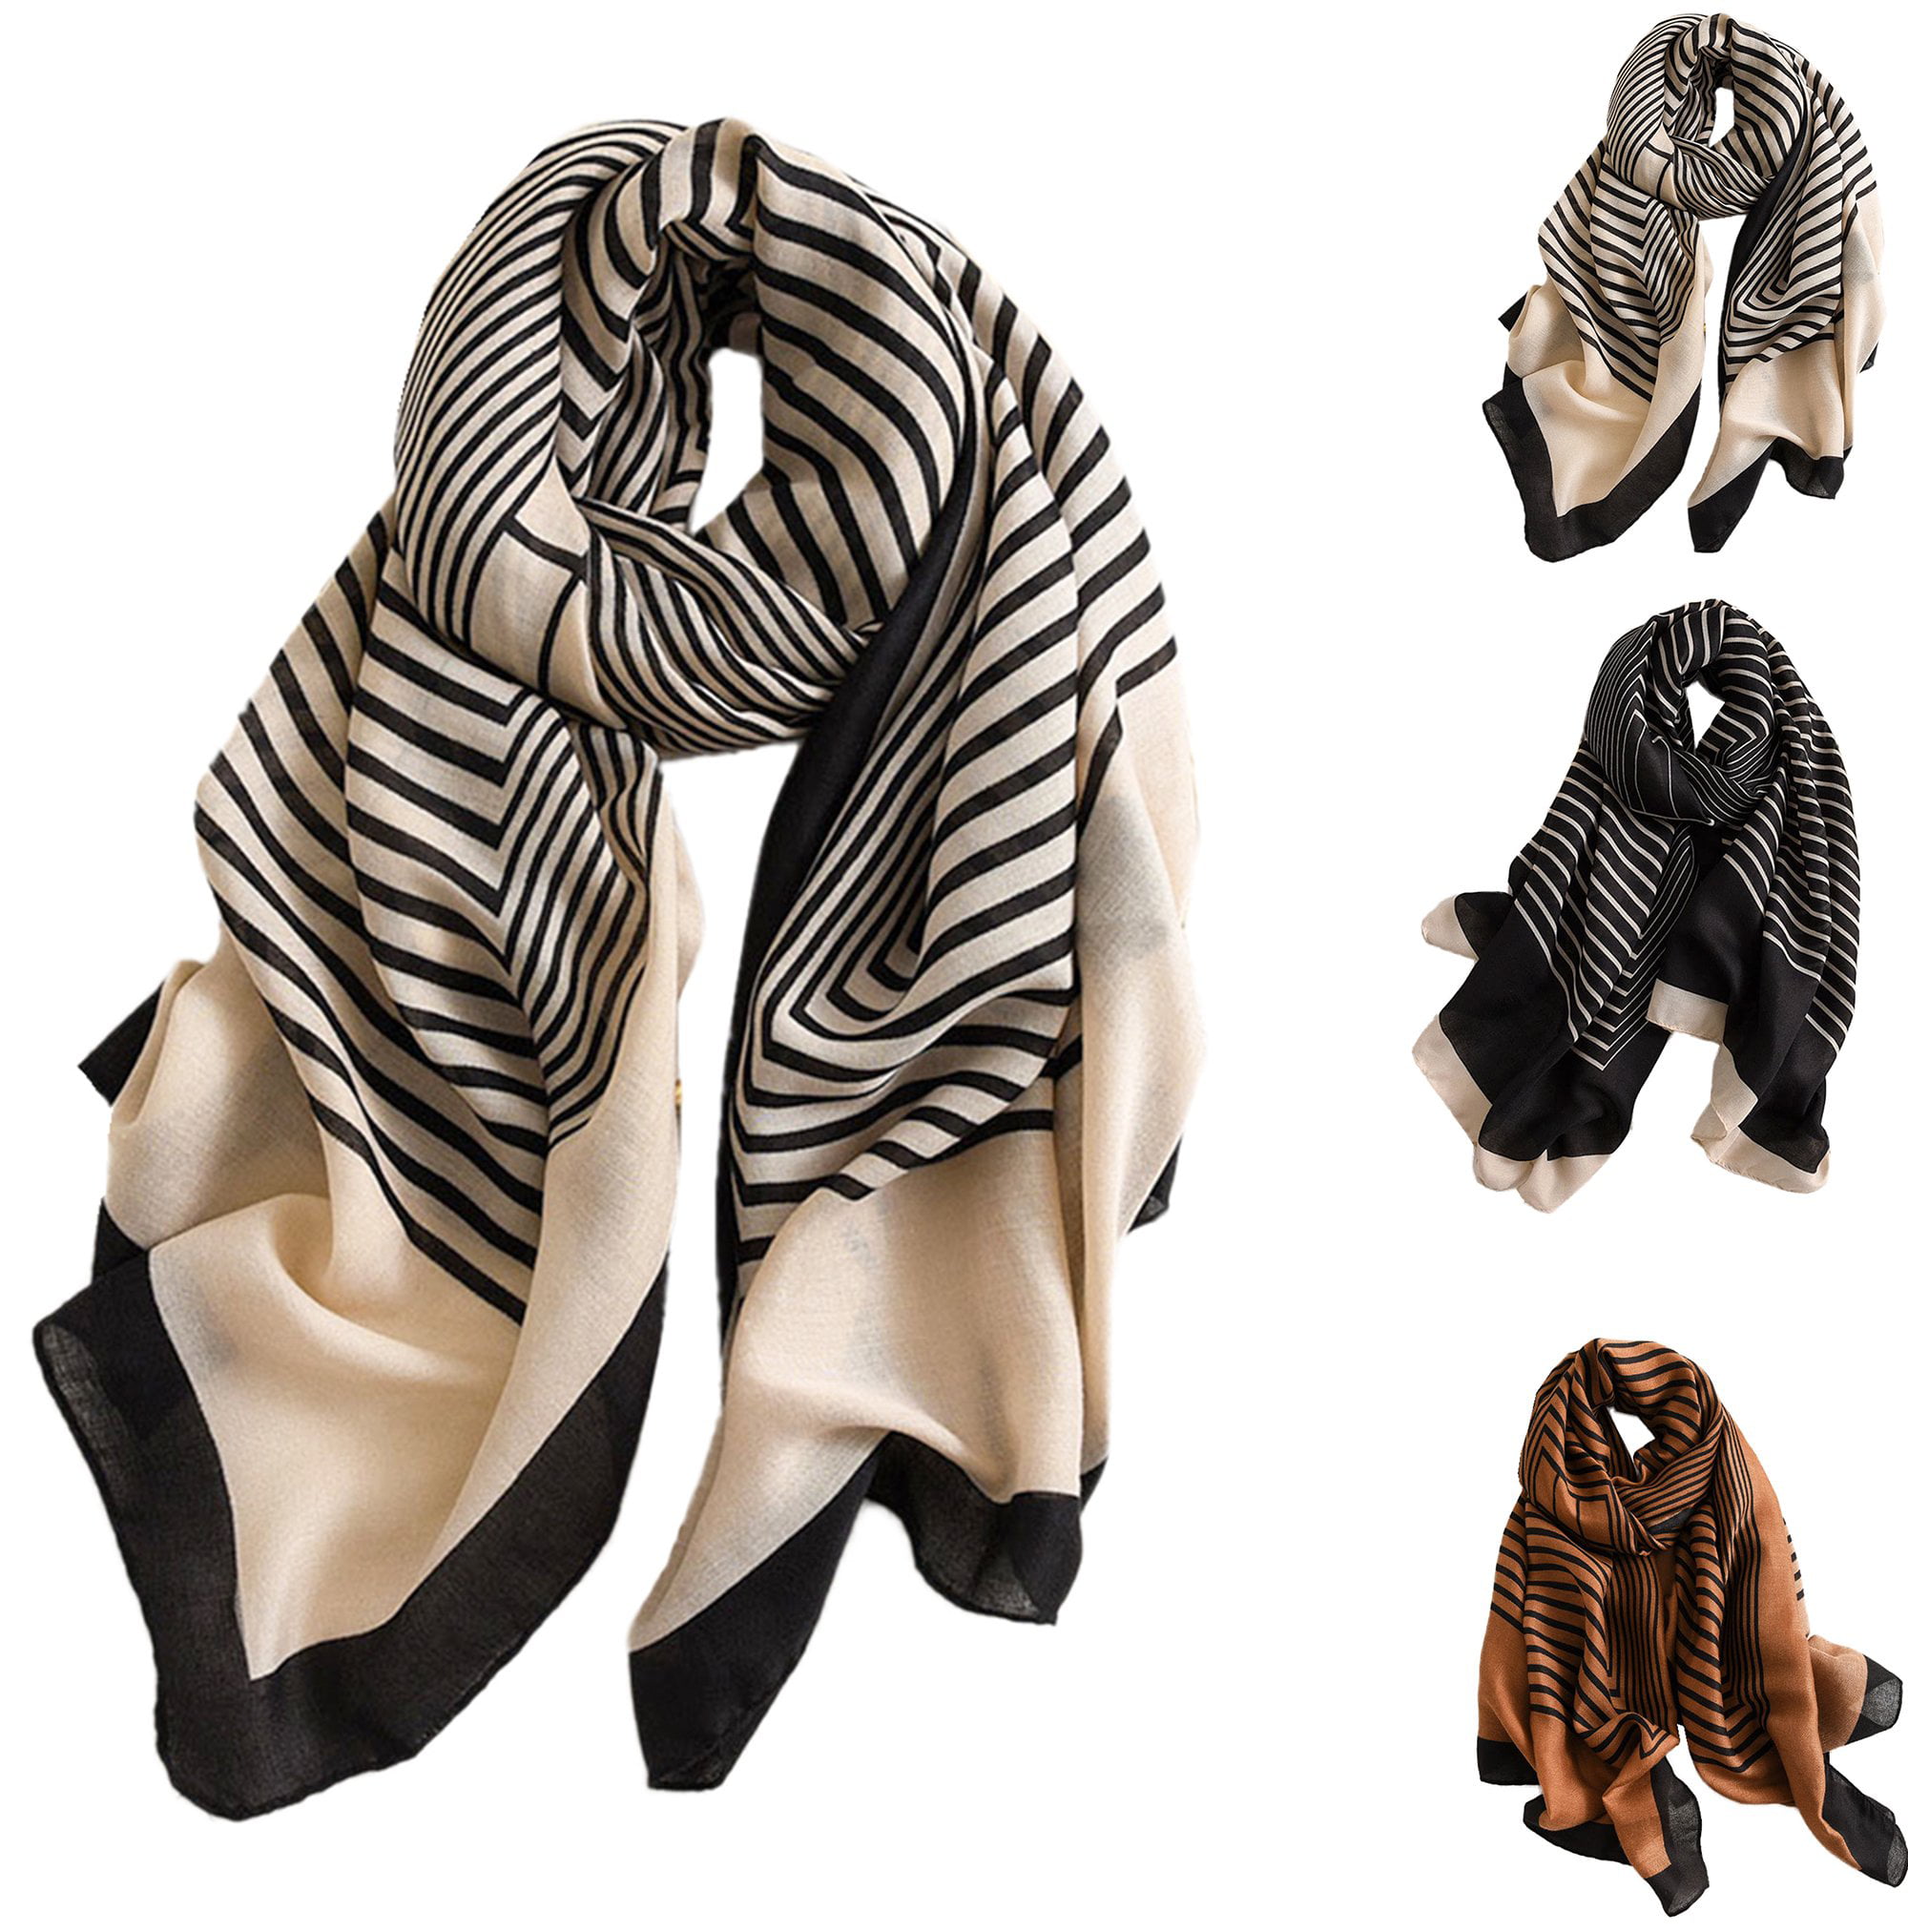 Hammer Anvil Mens Plaid Striped Scarf Womens Winter Scarves